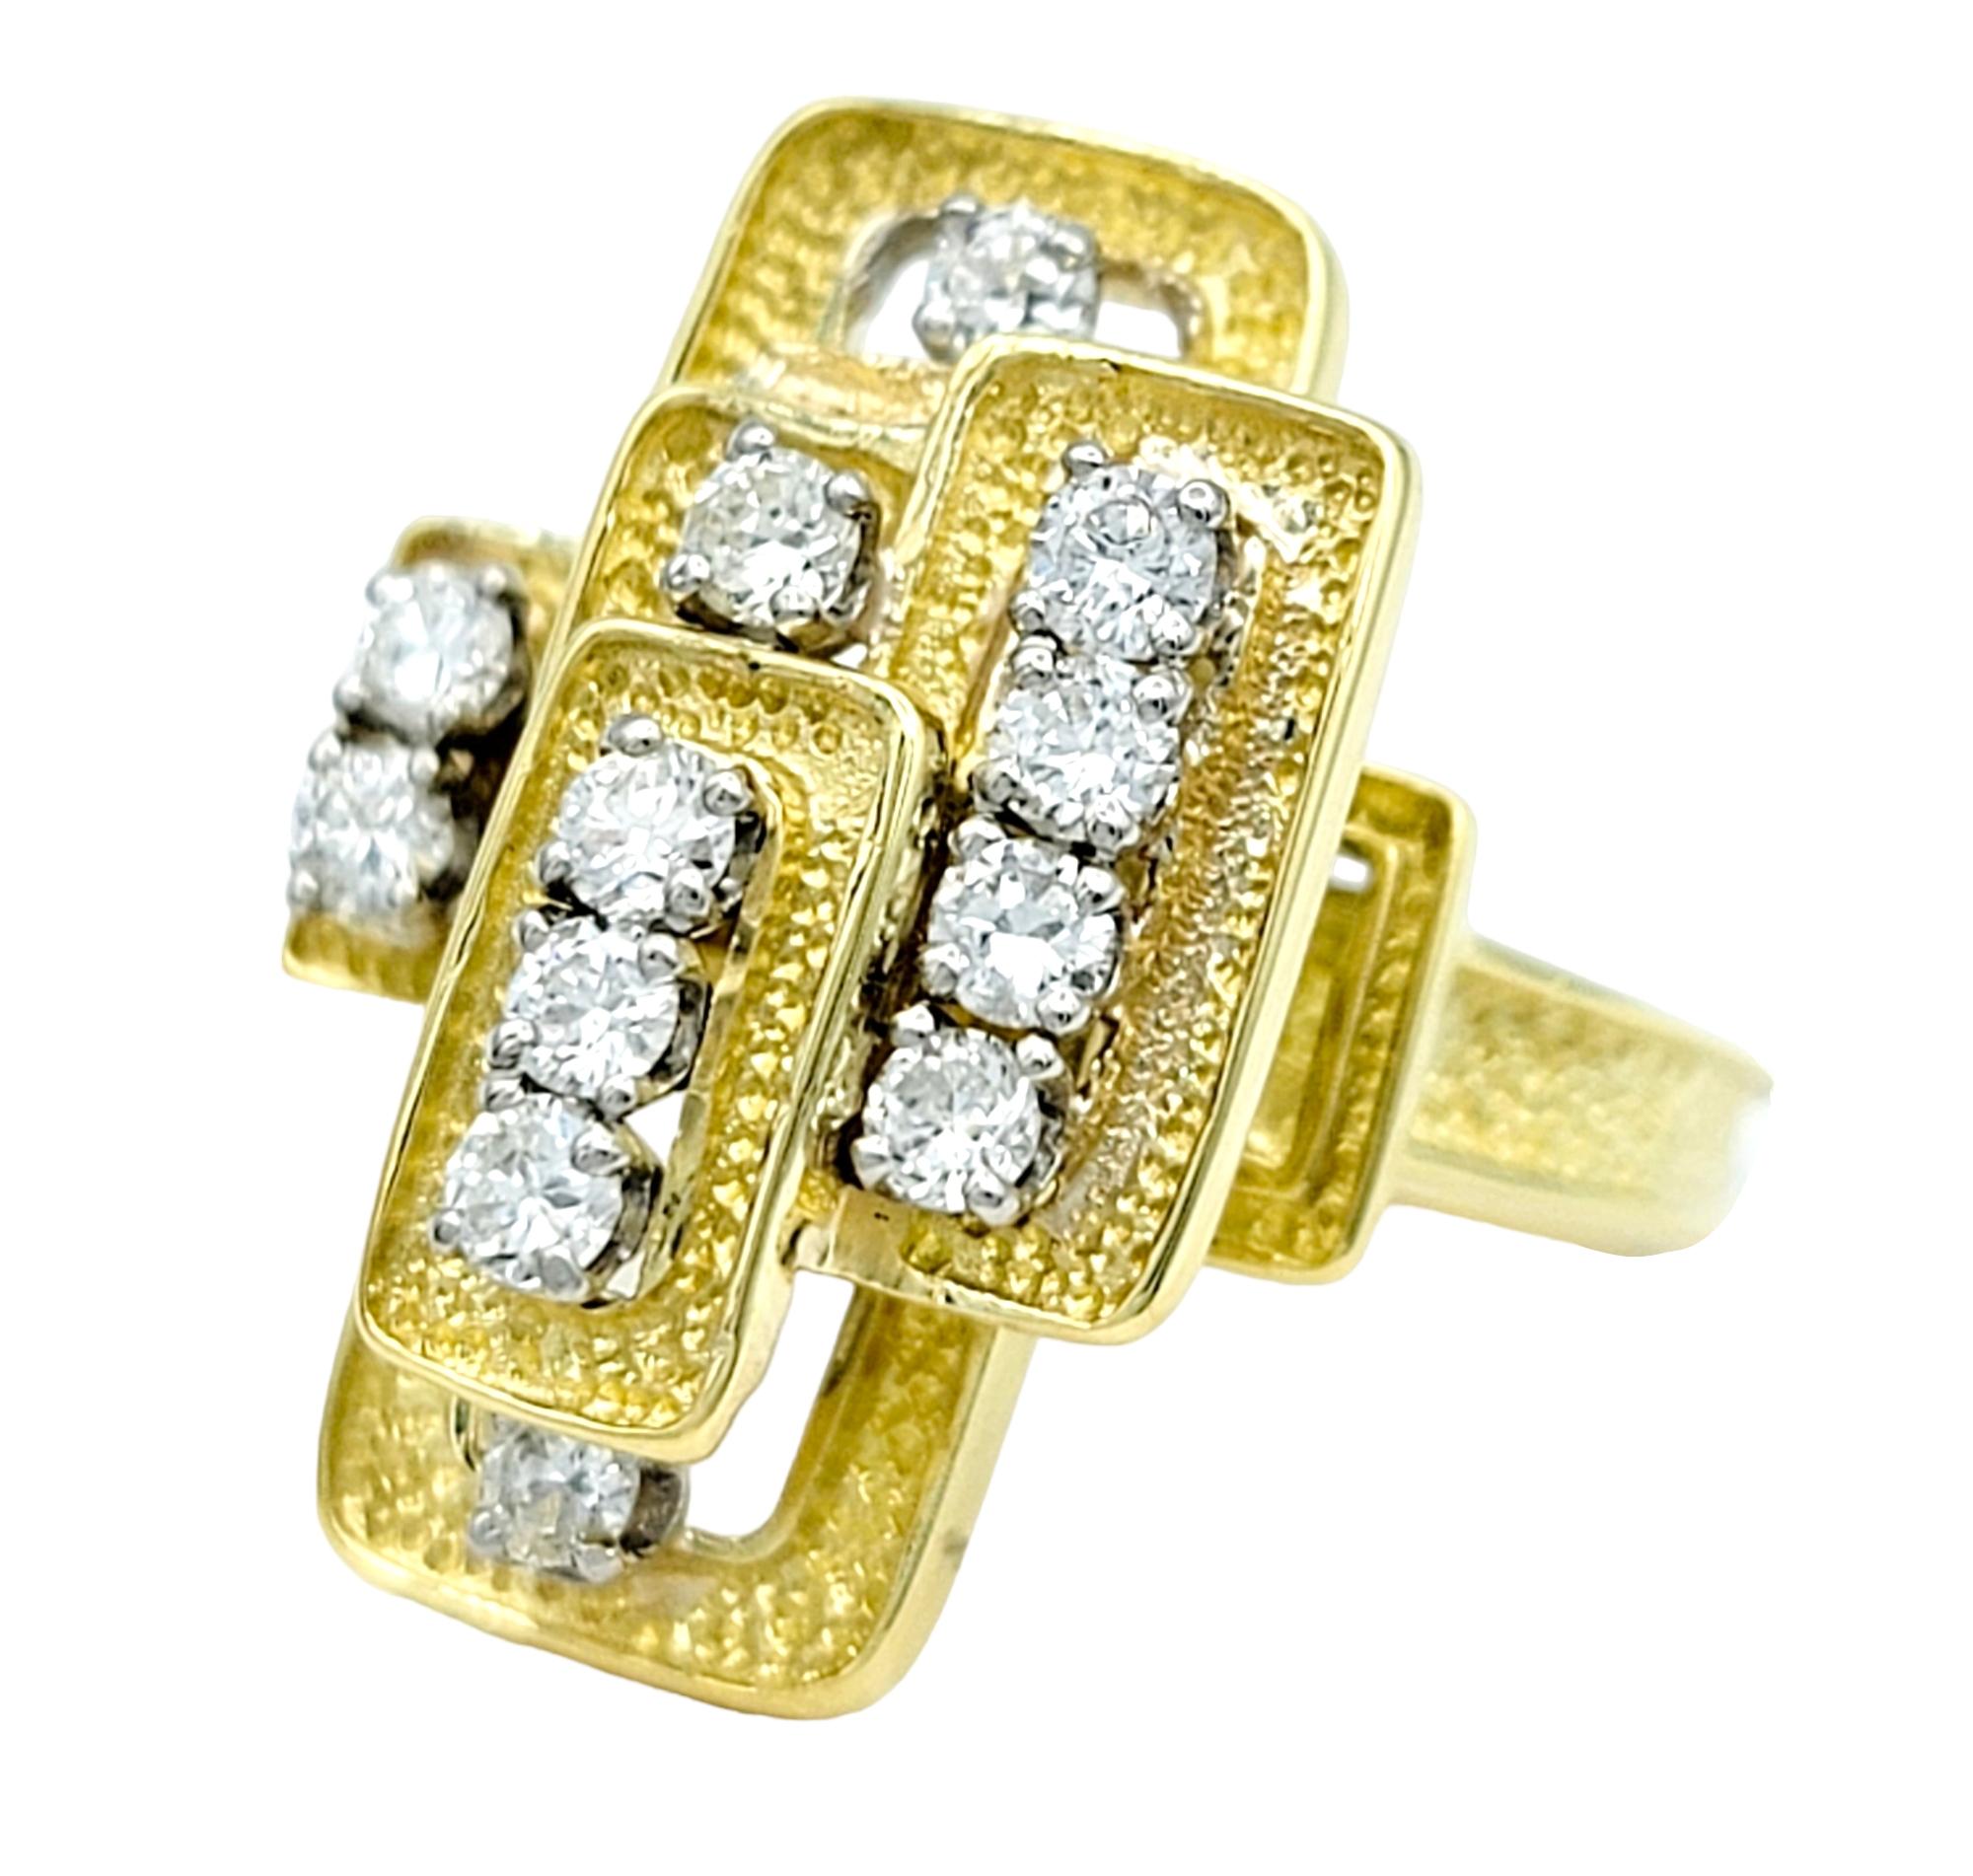 Ring size: 6.5

Elevate your style with our exquisite stacked diamond and gold cocktail ring, a true masterpiece of elegance and modernity. This stunning piece features an assortment of tiered rectangular-shaped tiles, each meticulously crafted with